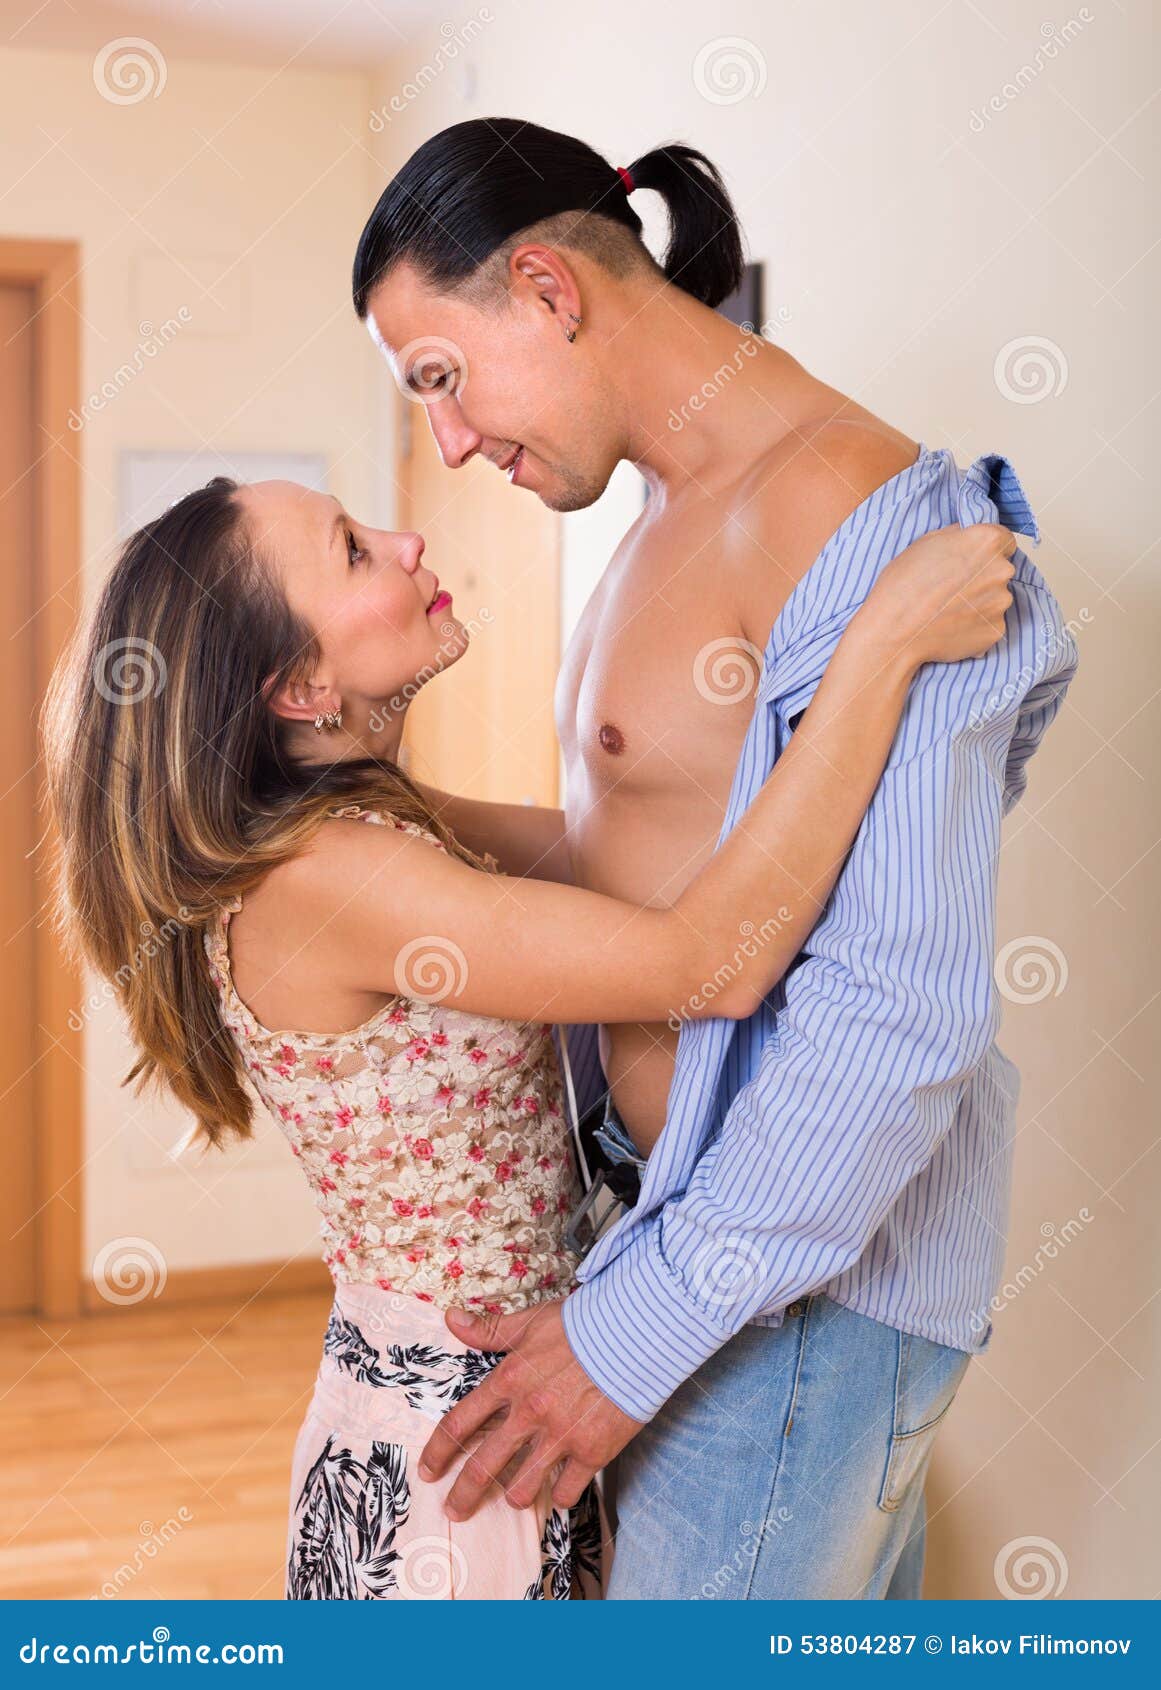 Adult Couple Having Sex at Home Stock Image image